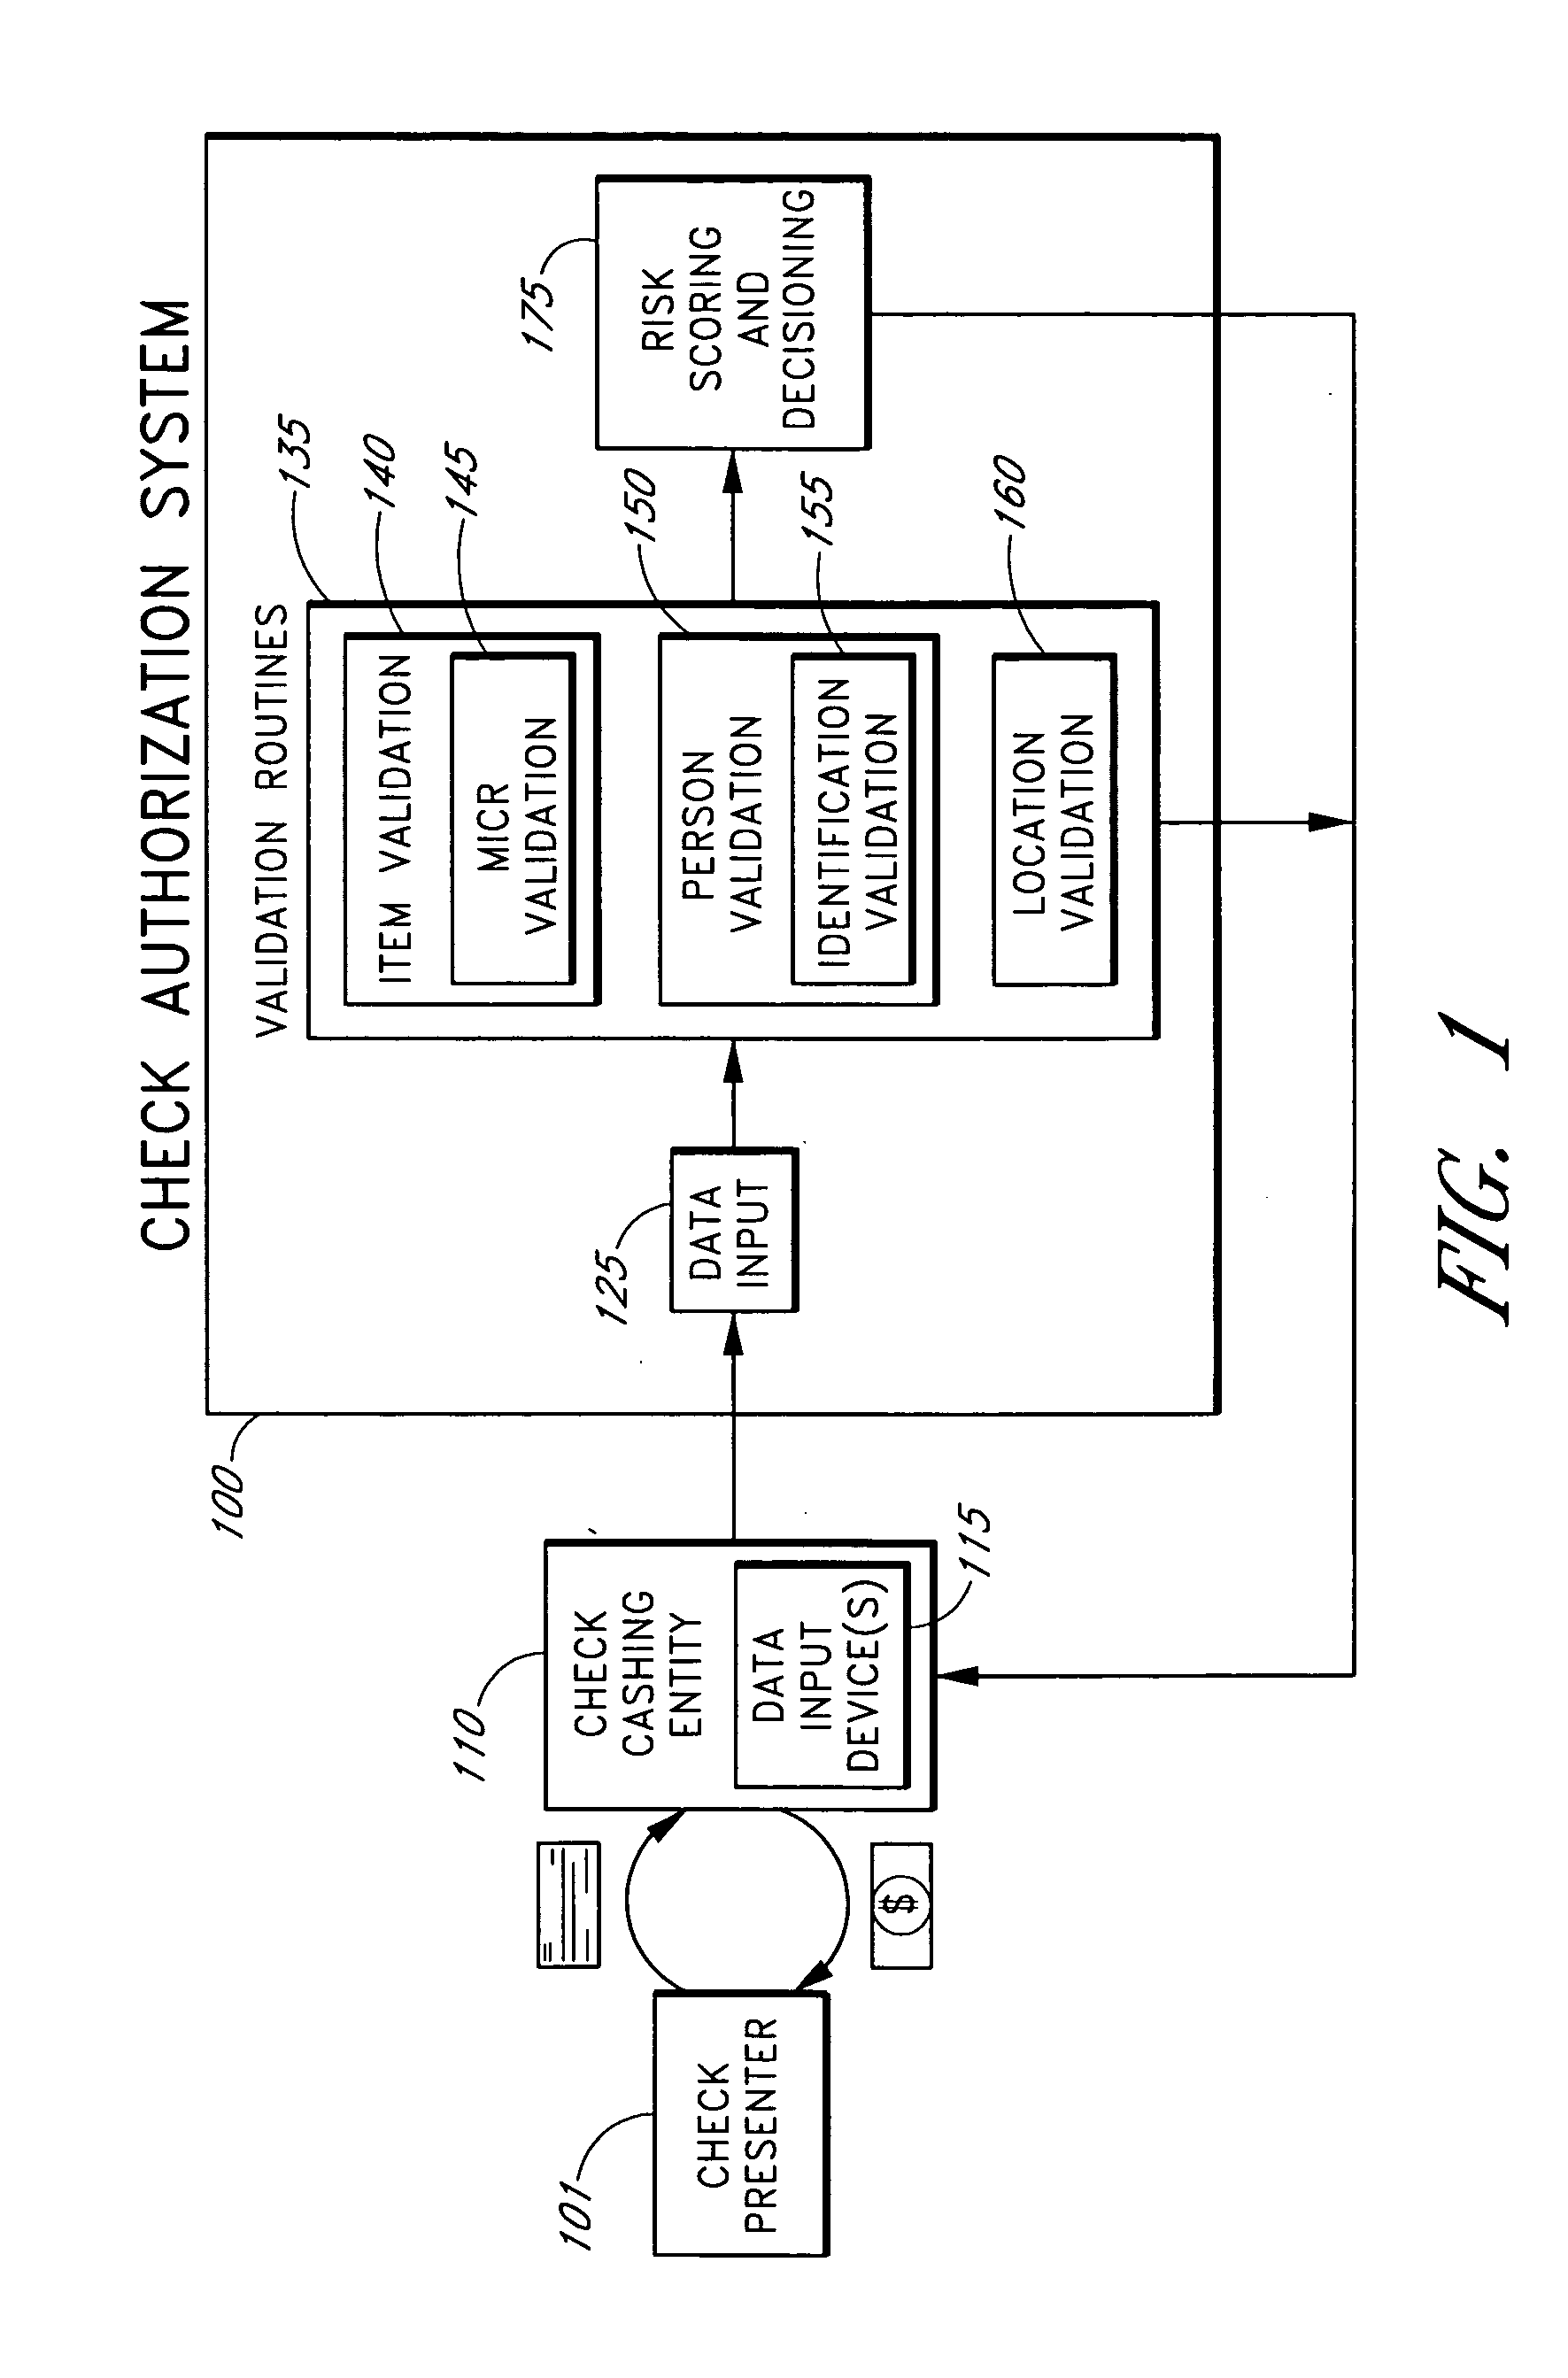 Systems and methods for assessing the risk of financial transaction using geographic-related information